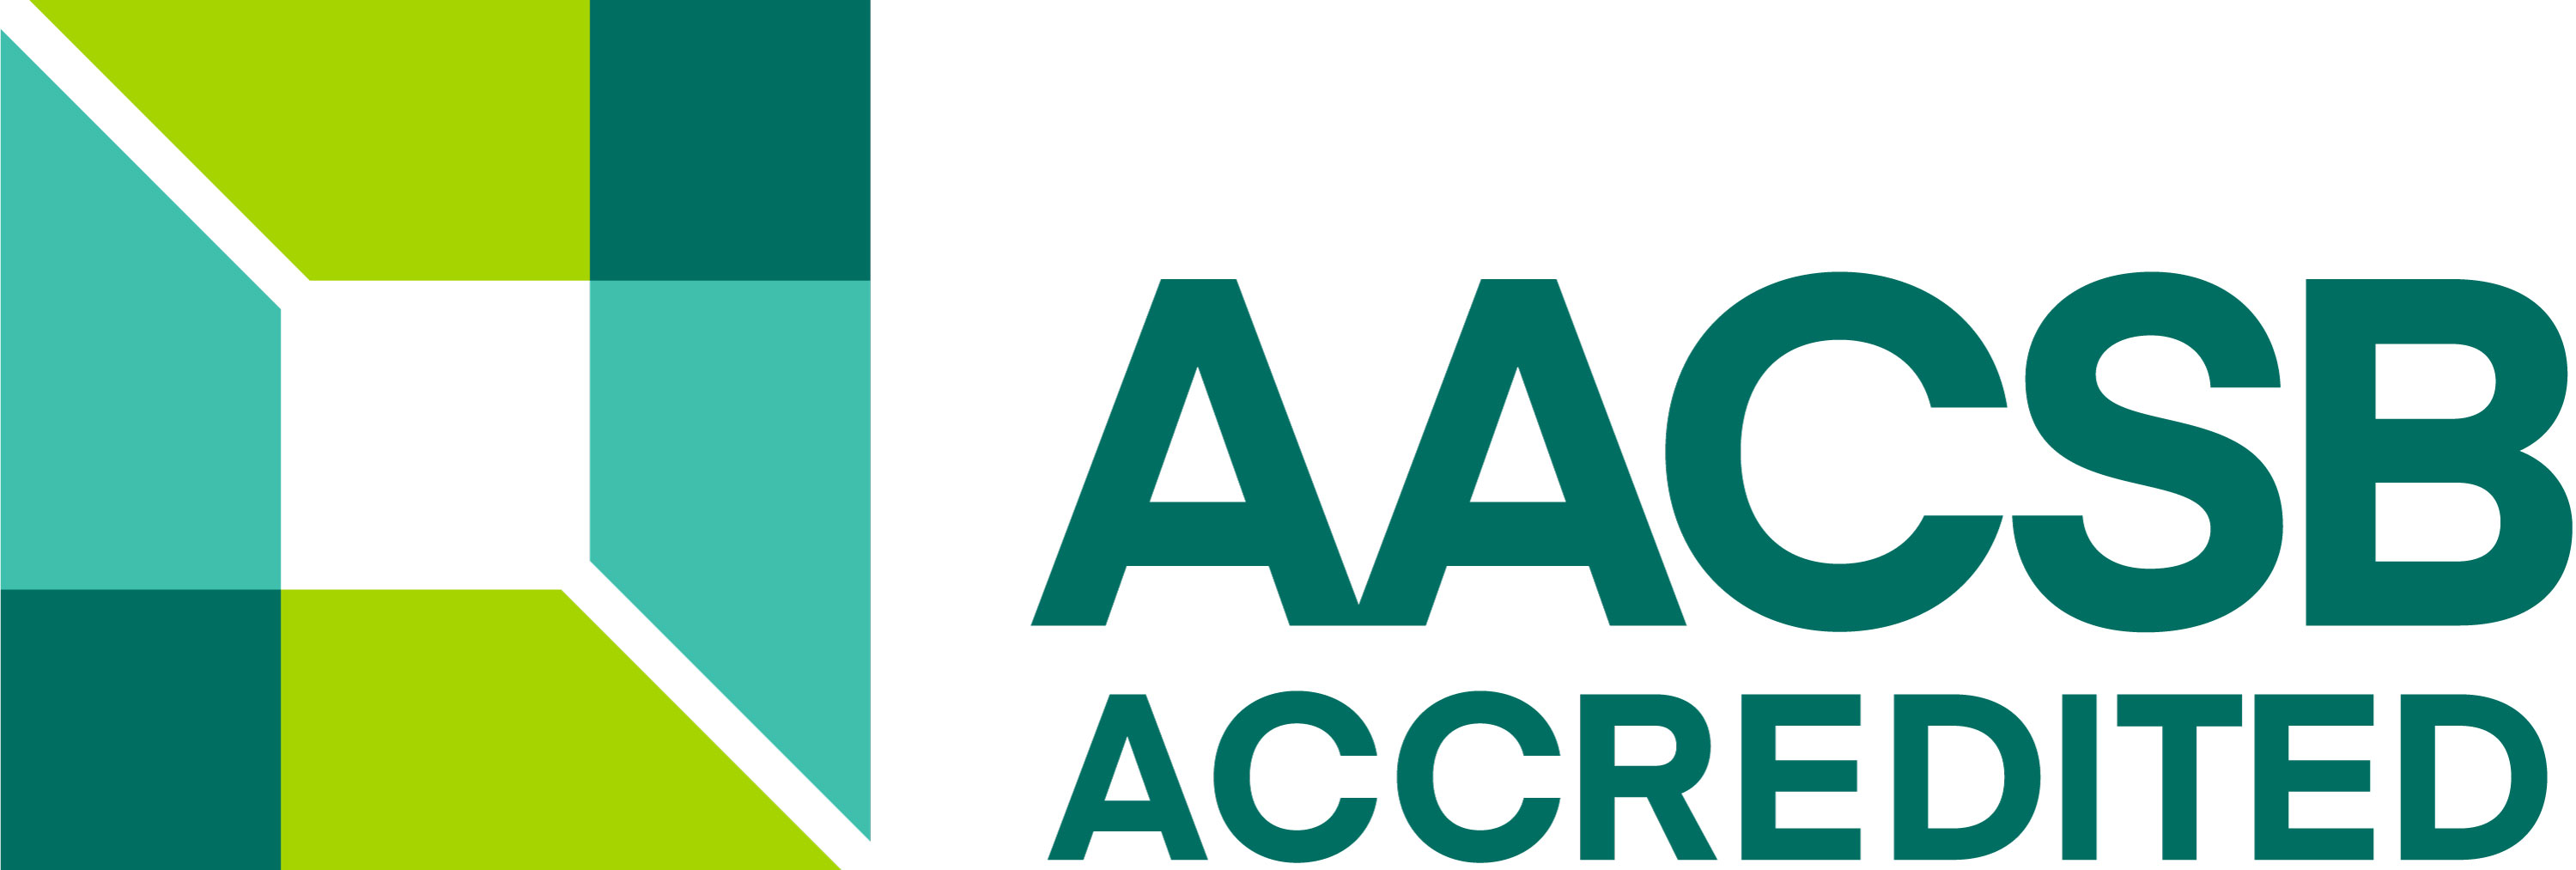 AACSB Logo Accredited Color RGB